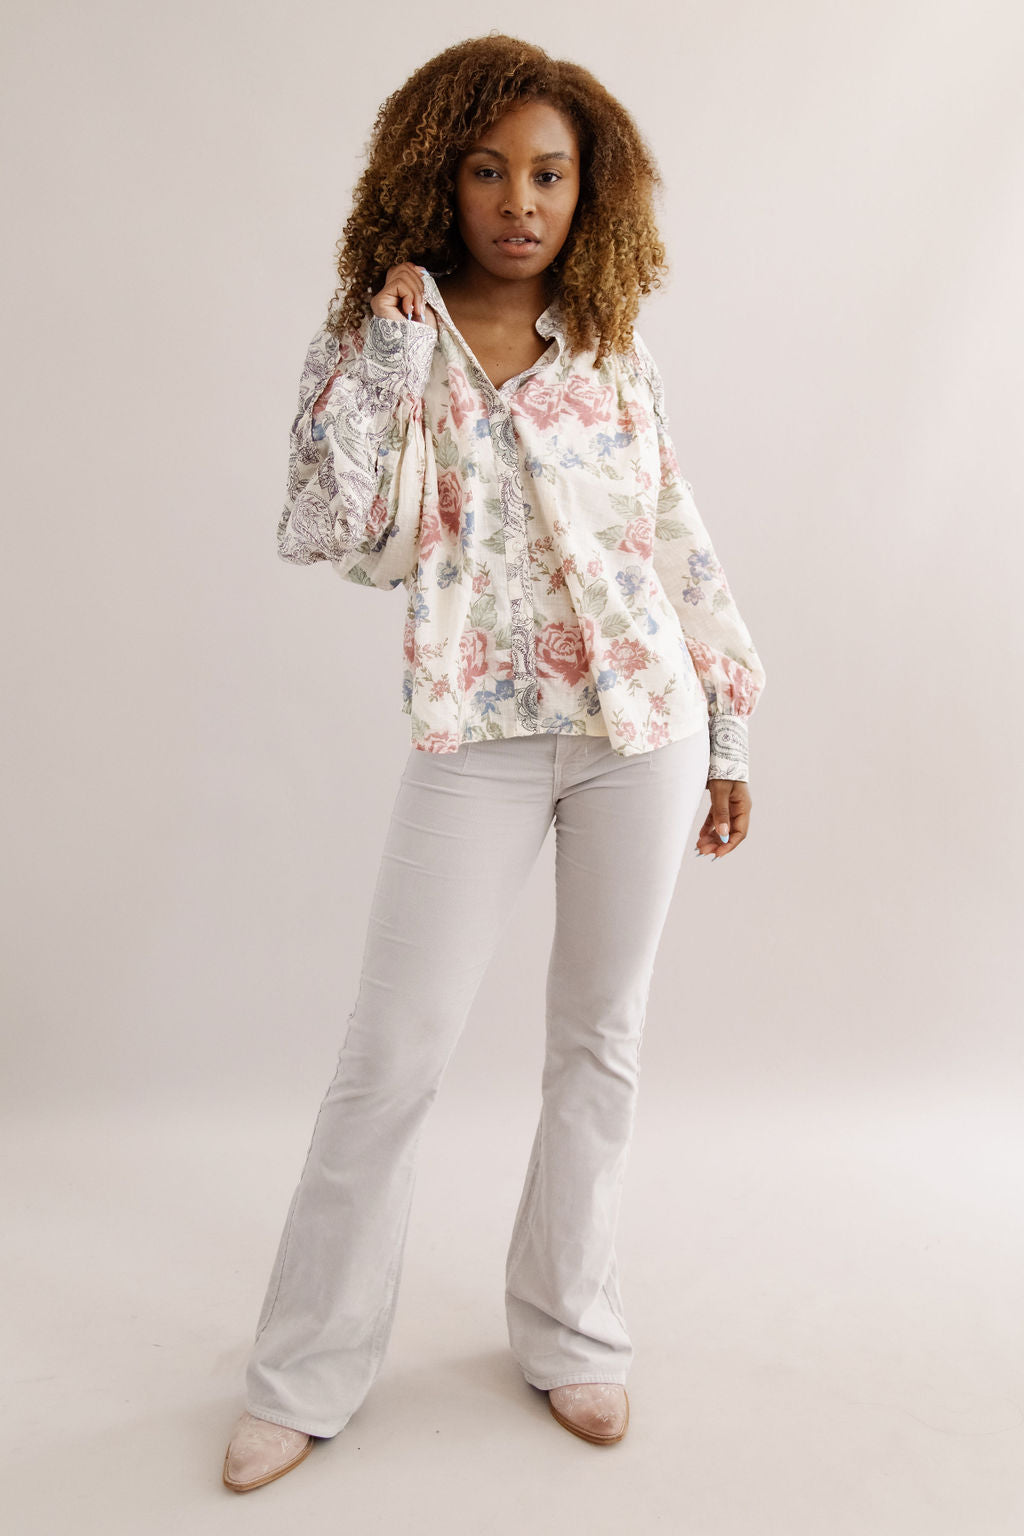 Free People | Maraya Printed Top | Antique Combo - Poppy and Stella